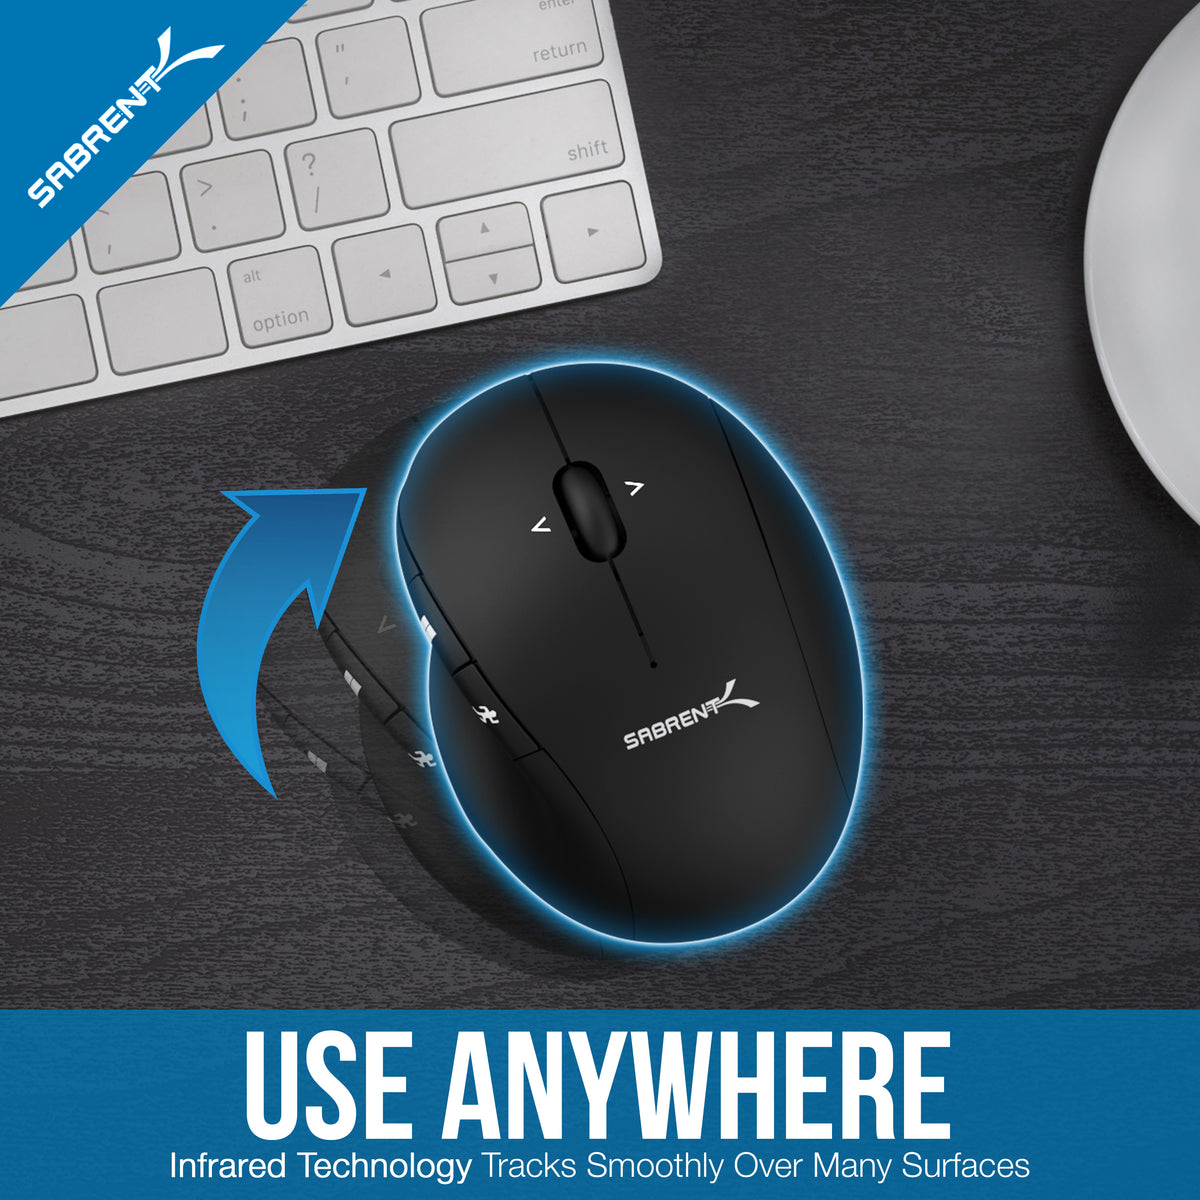 Ergonomic 2.4GHz Wireless Rechargeable Mouse